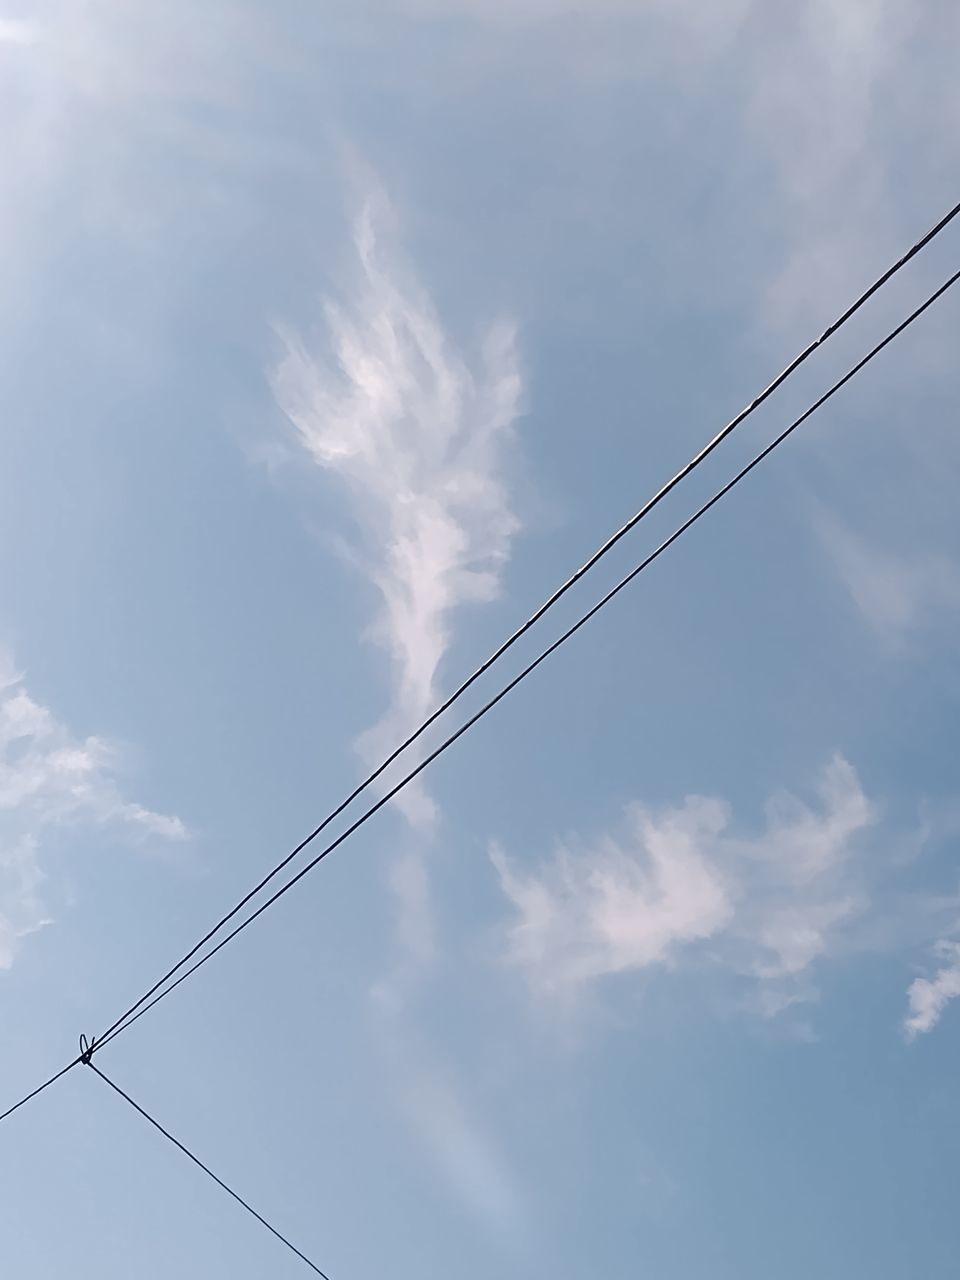 sky, cloud, blue, low angle view, cable, nature, line, no people, overhead power line, electricity, day, outdoors, technology, mast, street light, copy space, wind, power supply